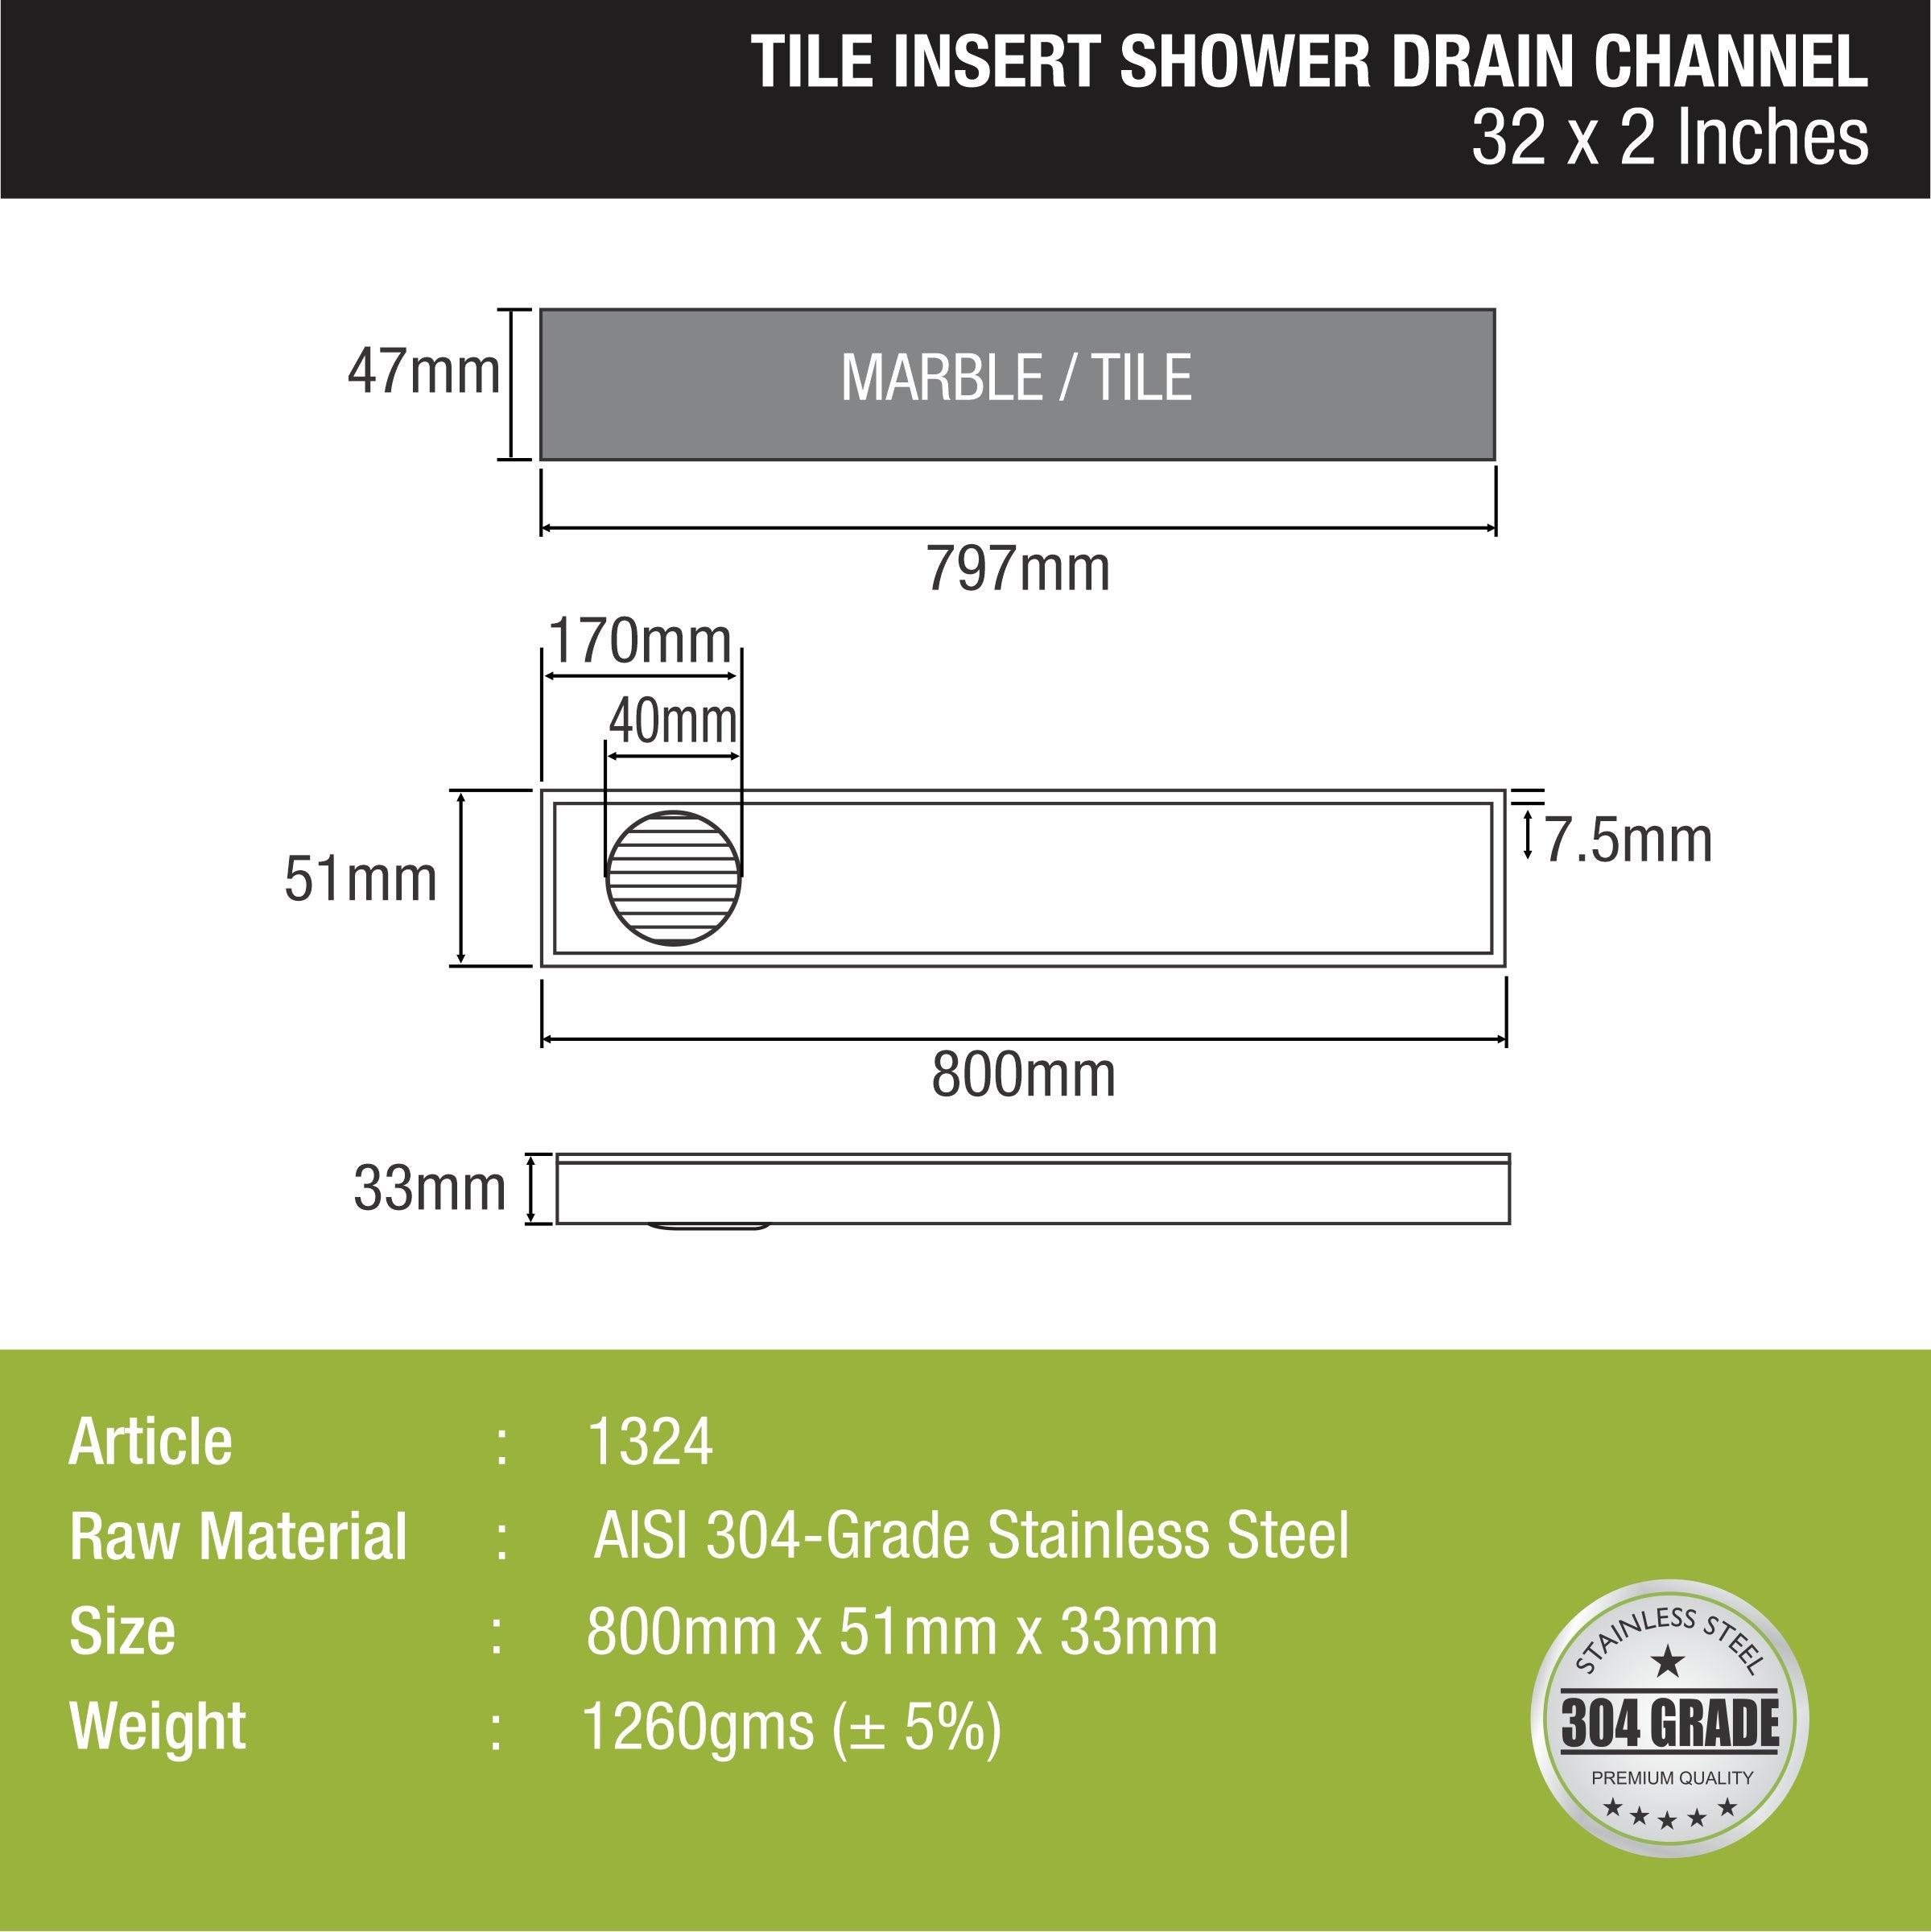 Tile Insert Shower Drain Channel (32 x 2 Inches) sizes and dimensions